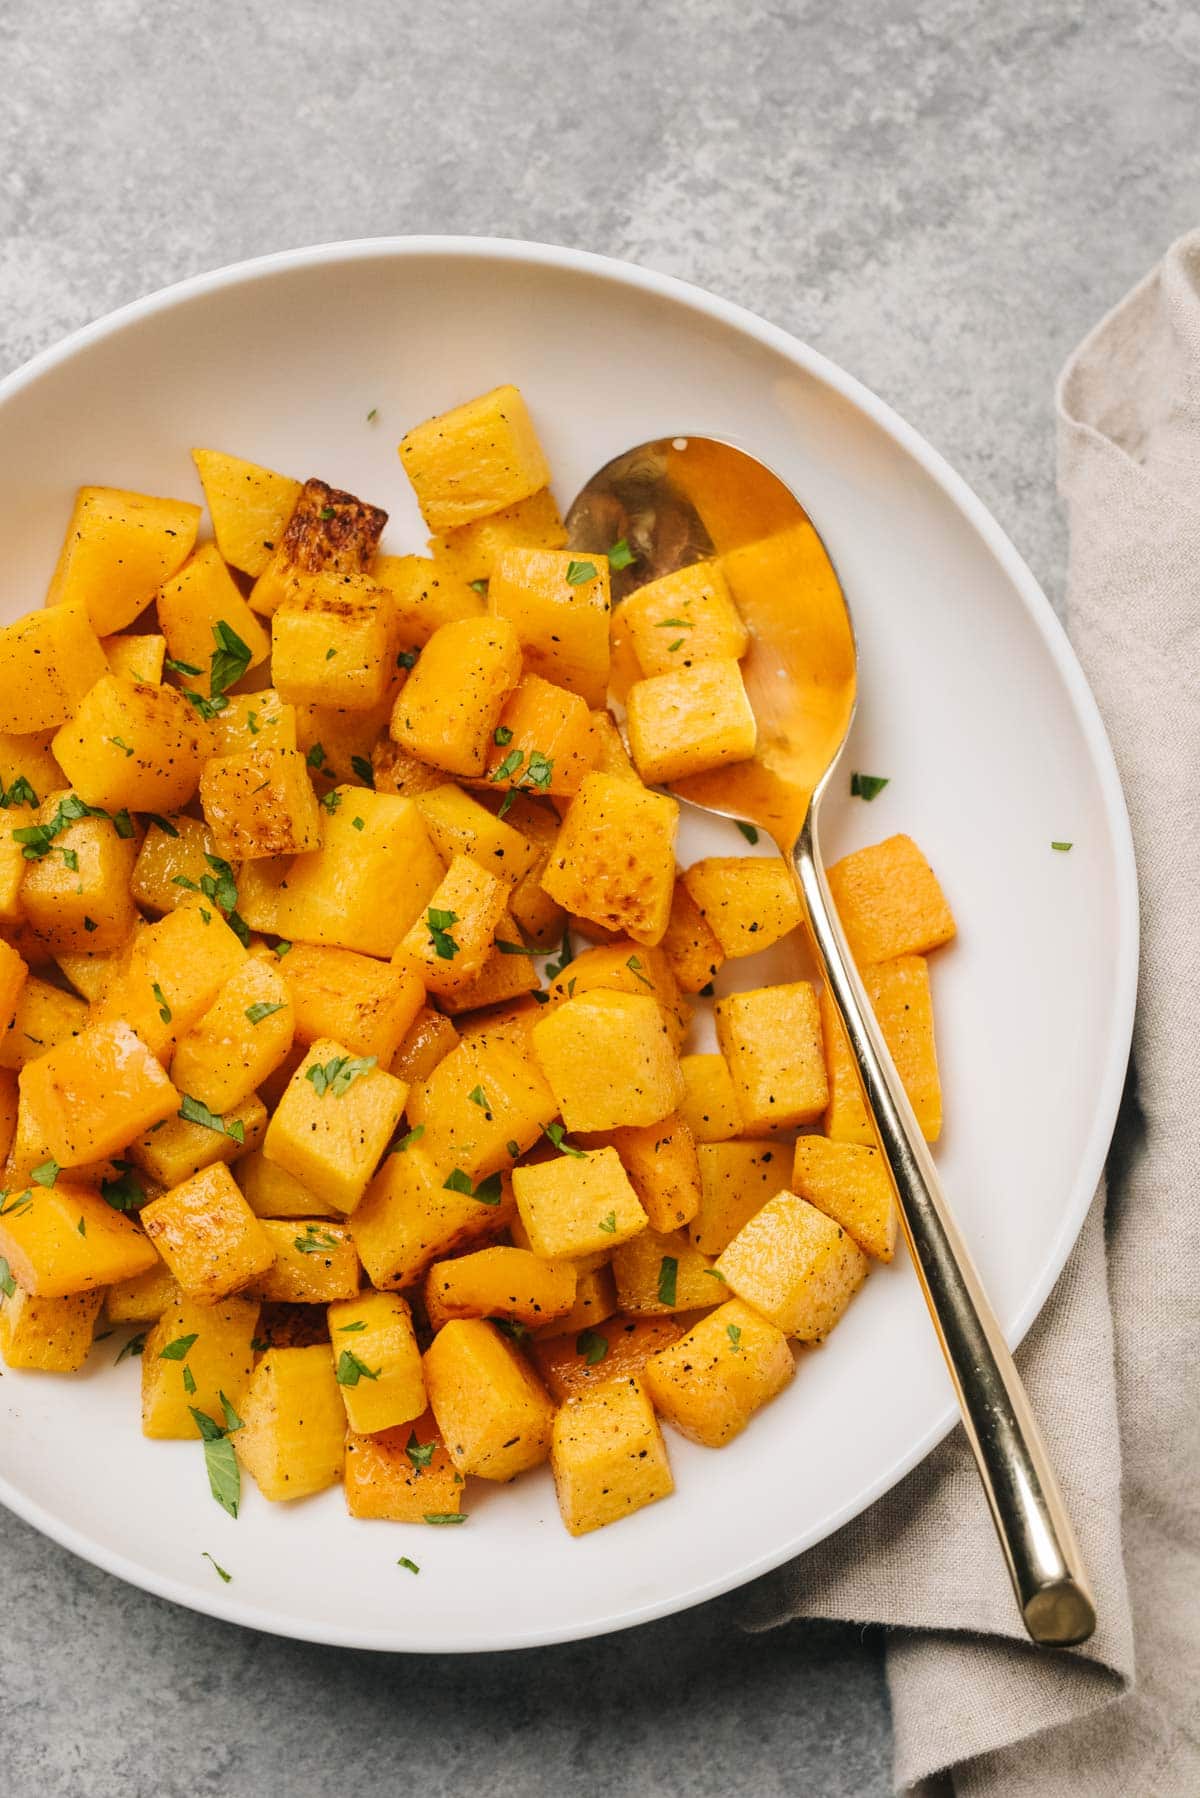 Cubed and roasted butternut squash in a white bowl with seasoning and a spoon.